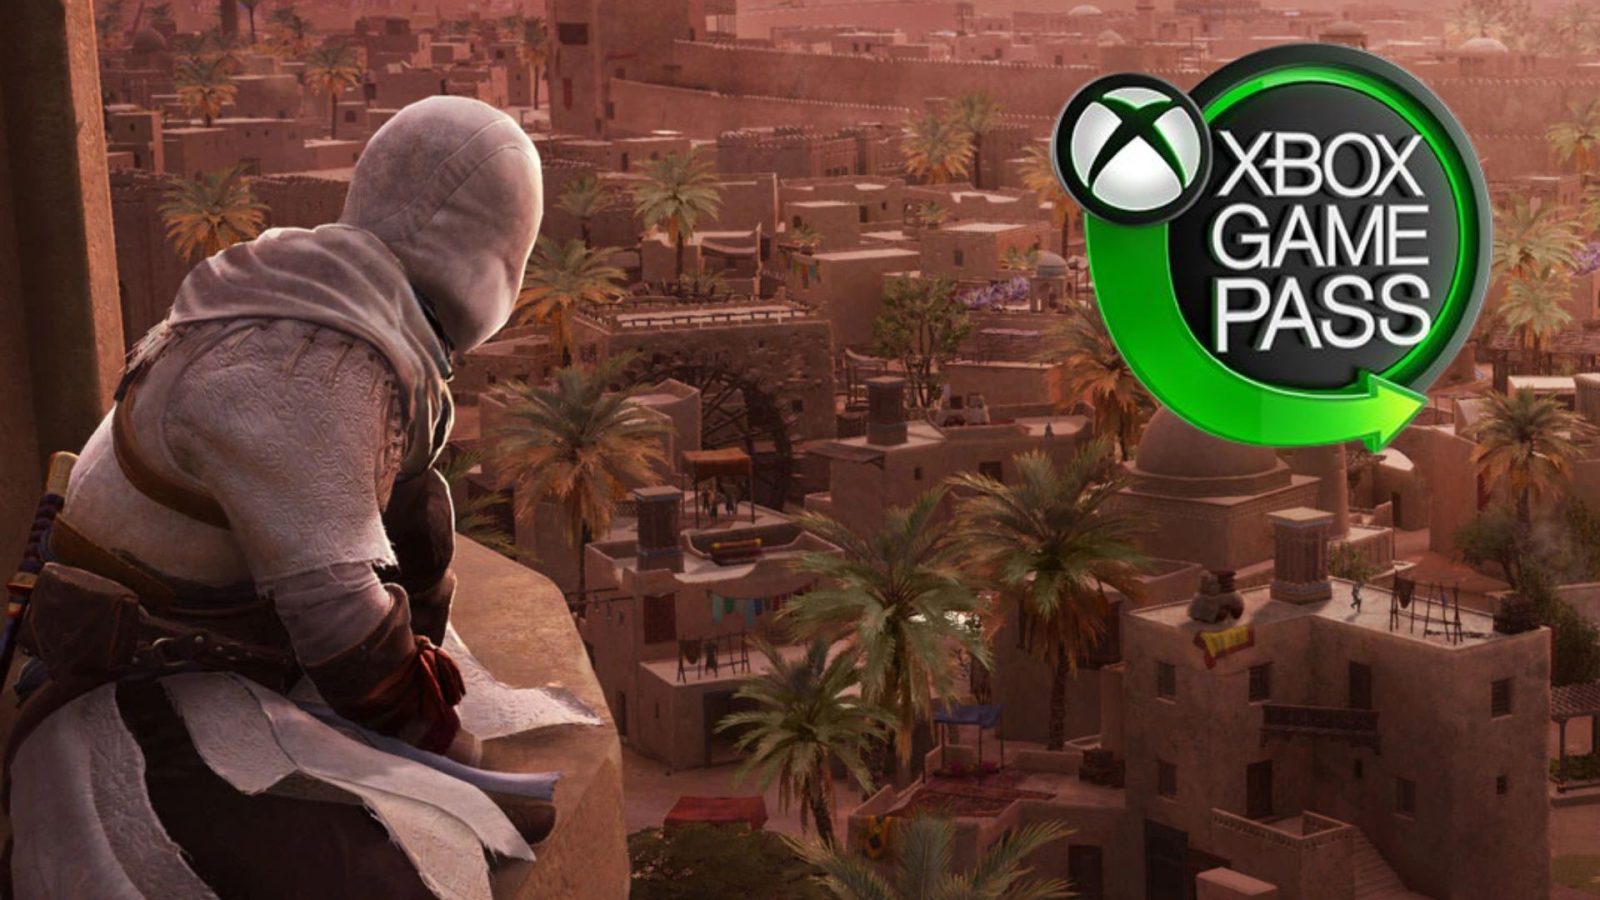 Wait, Is Assassin's Creed Mirage Just Assassin's Creed 2007?